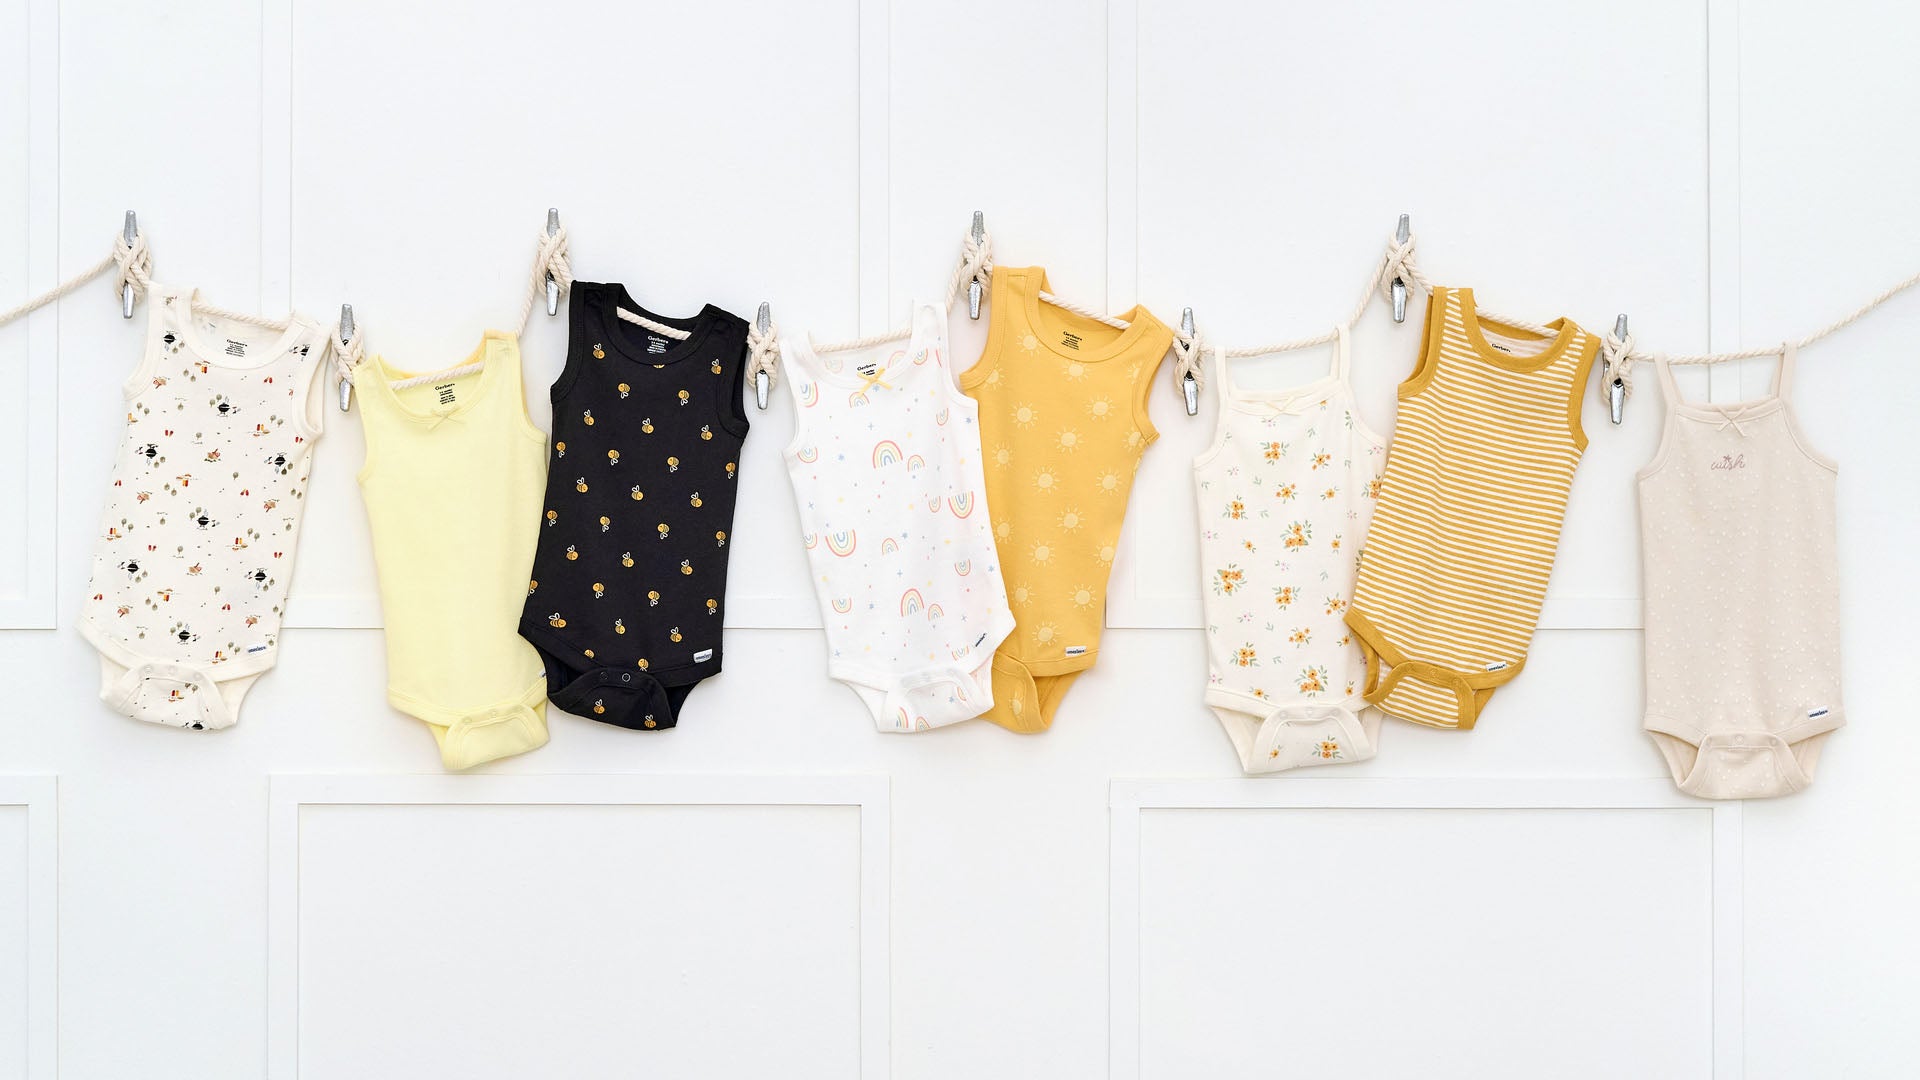 Seven baby bodysuits hanging in a row on a white wall, featuring various patterns and colors.